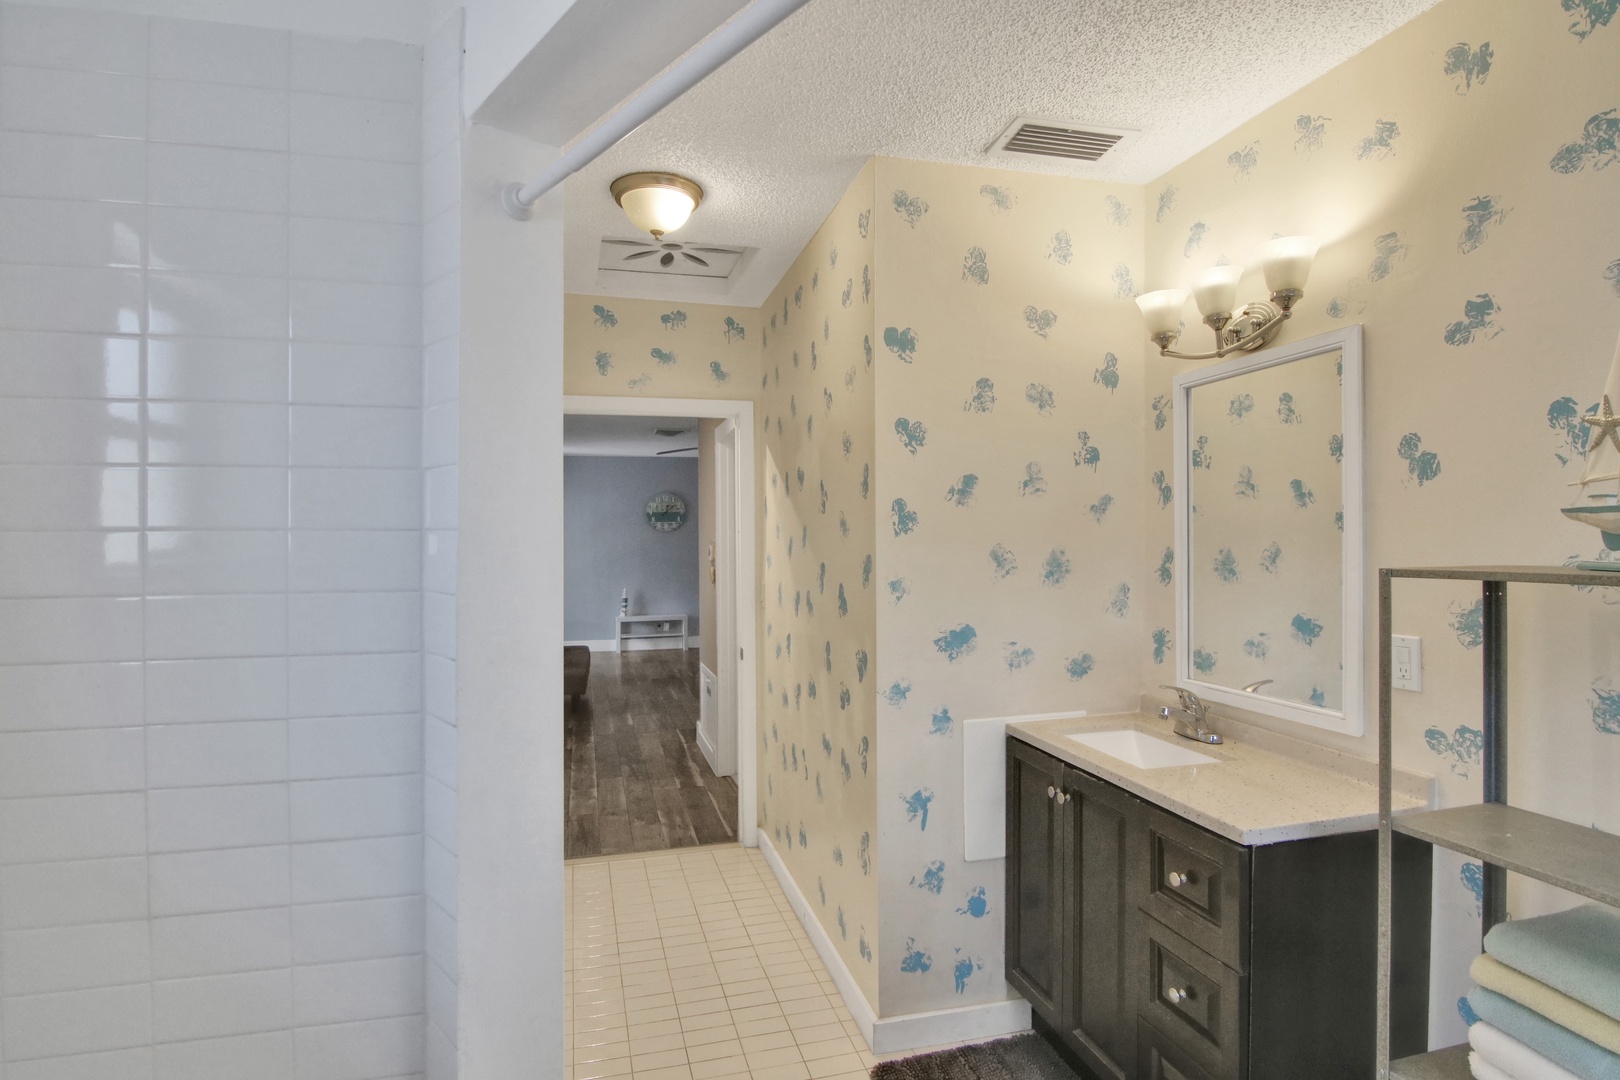 The final full bathroom offers a large vanity & walk-in shower